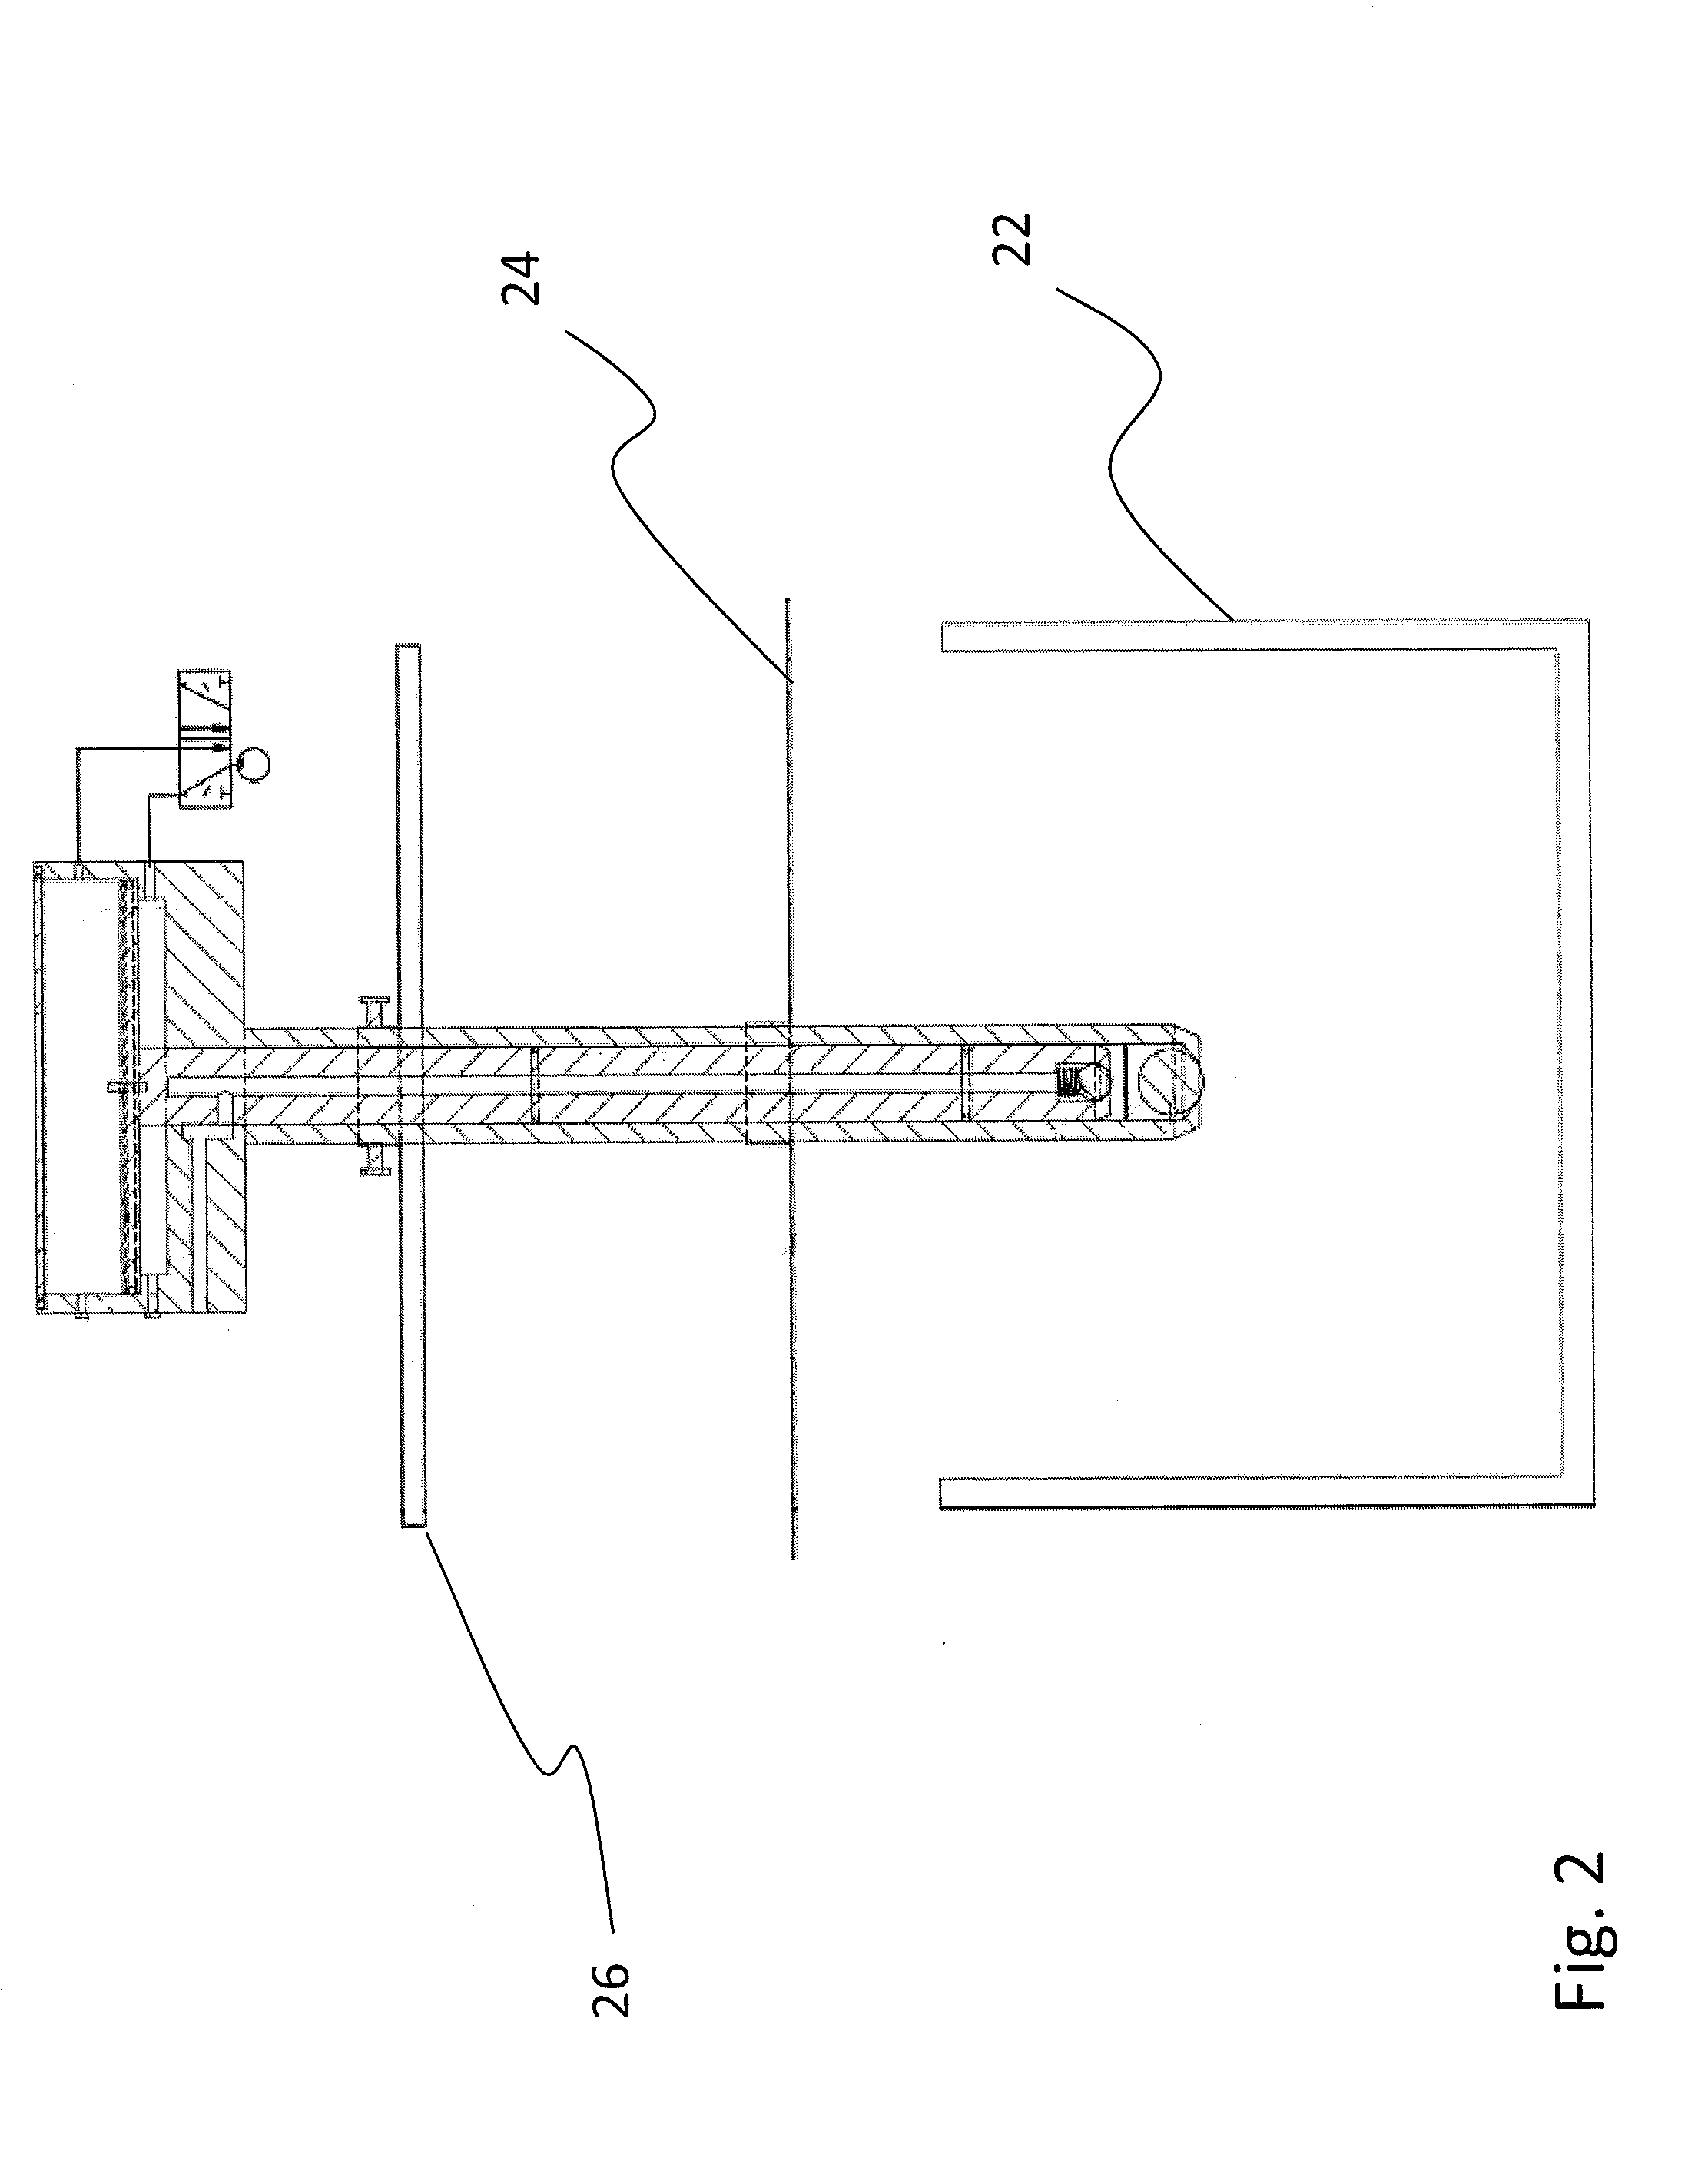 Metering device for delivery of a liquid or viscous substance